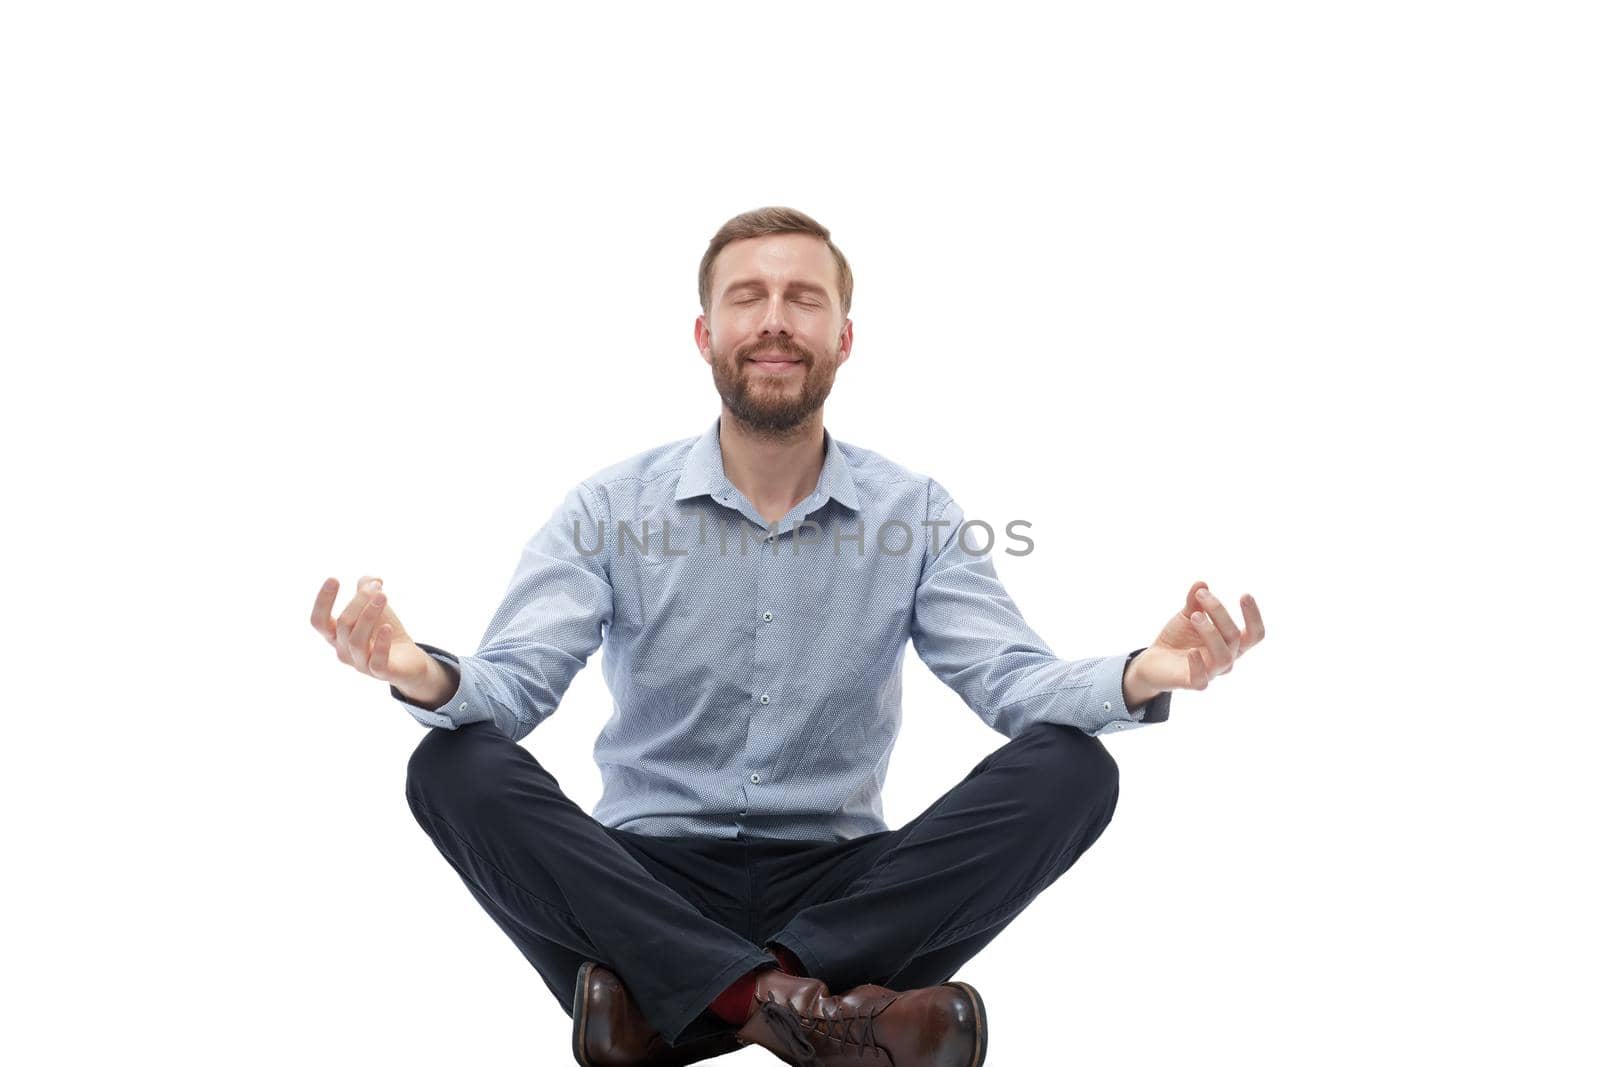 young businessman meditates sitting on the floor by asdf